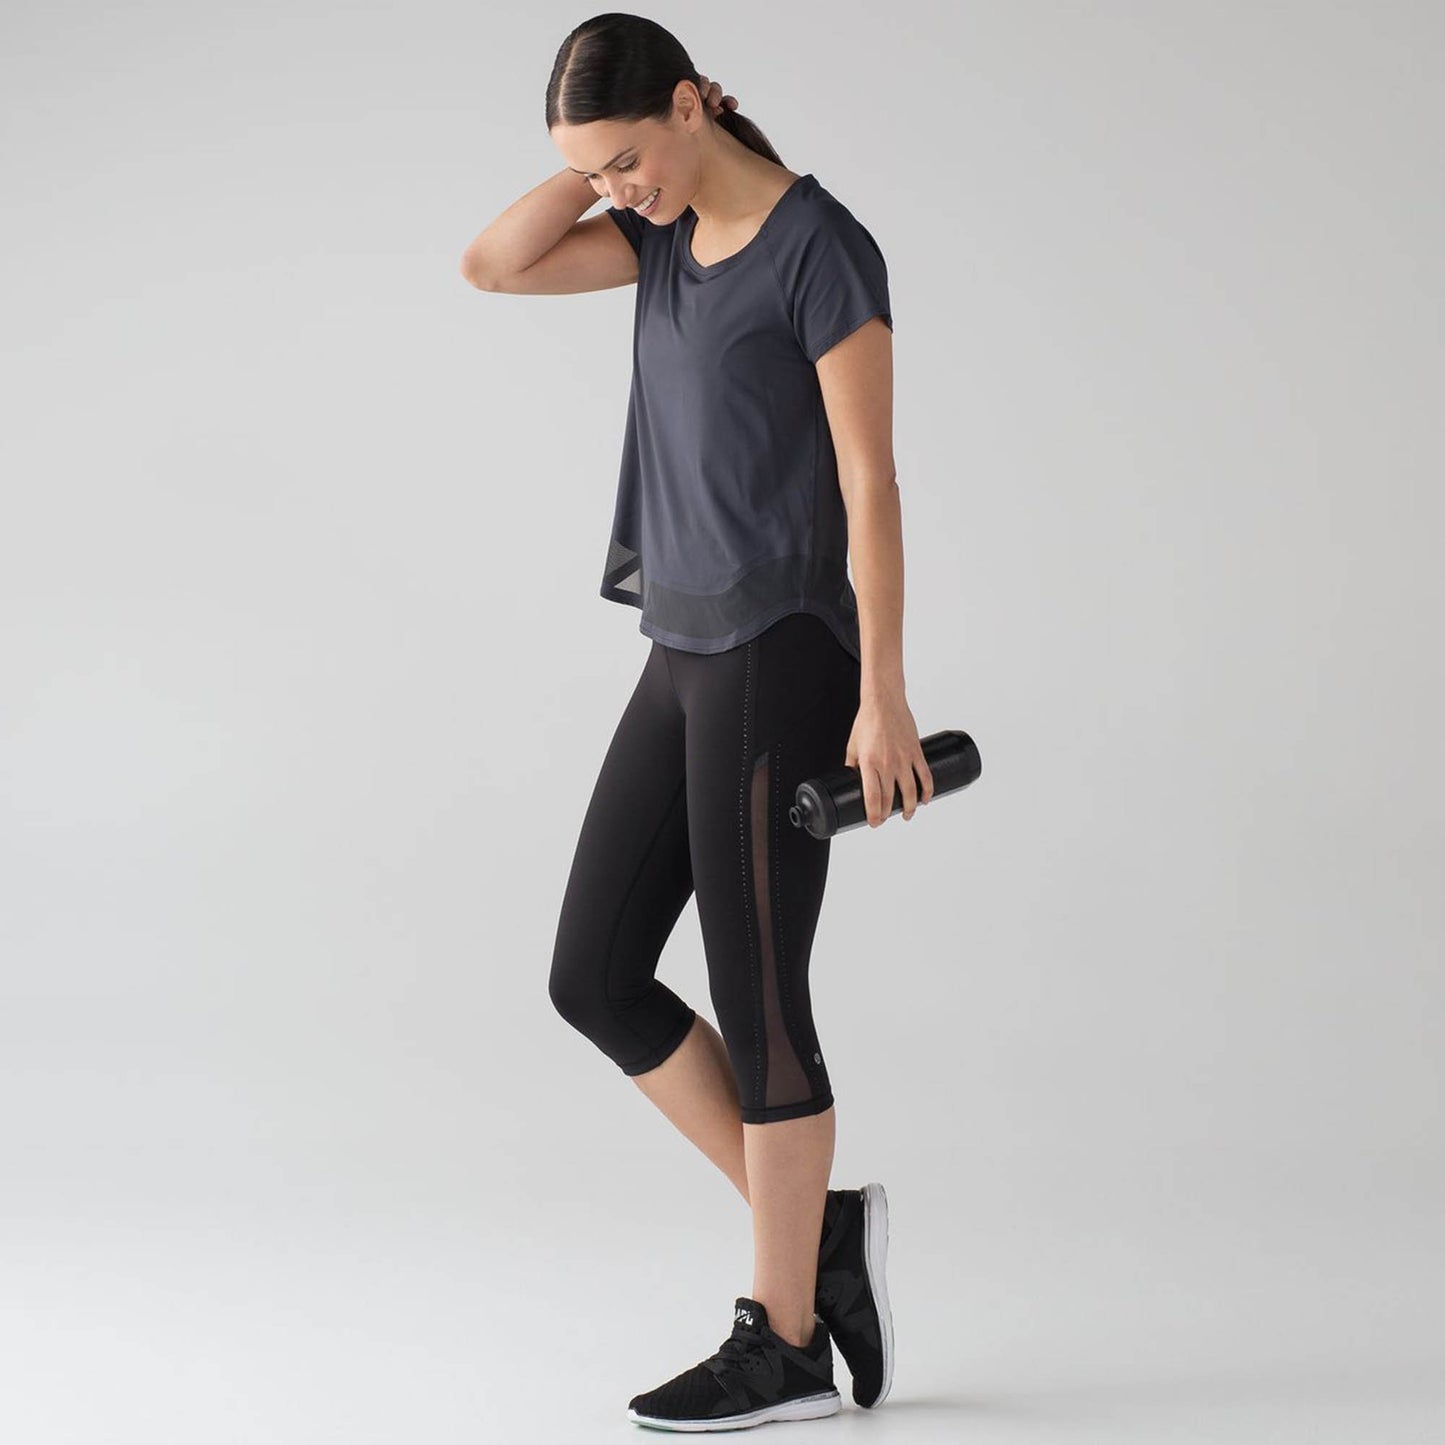 lululemon smooth stride crop full on luxtreme tights - size 6